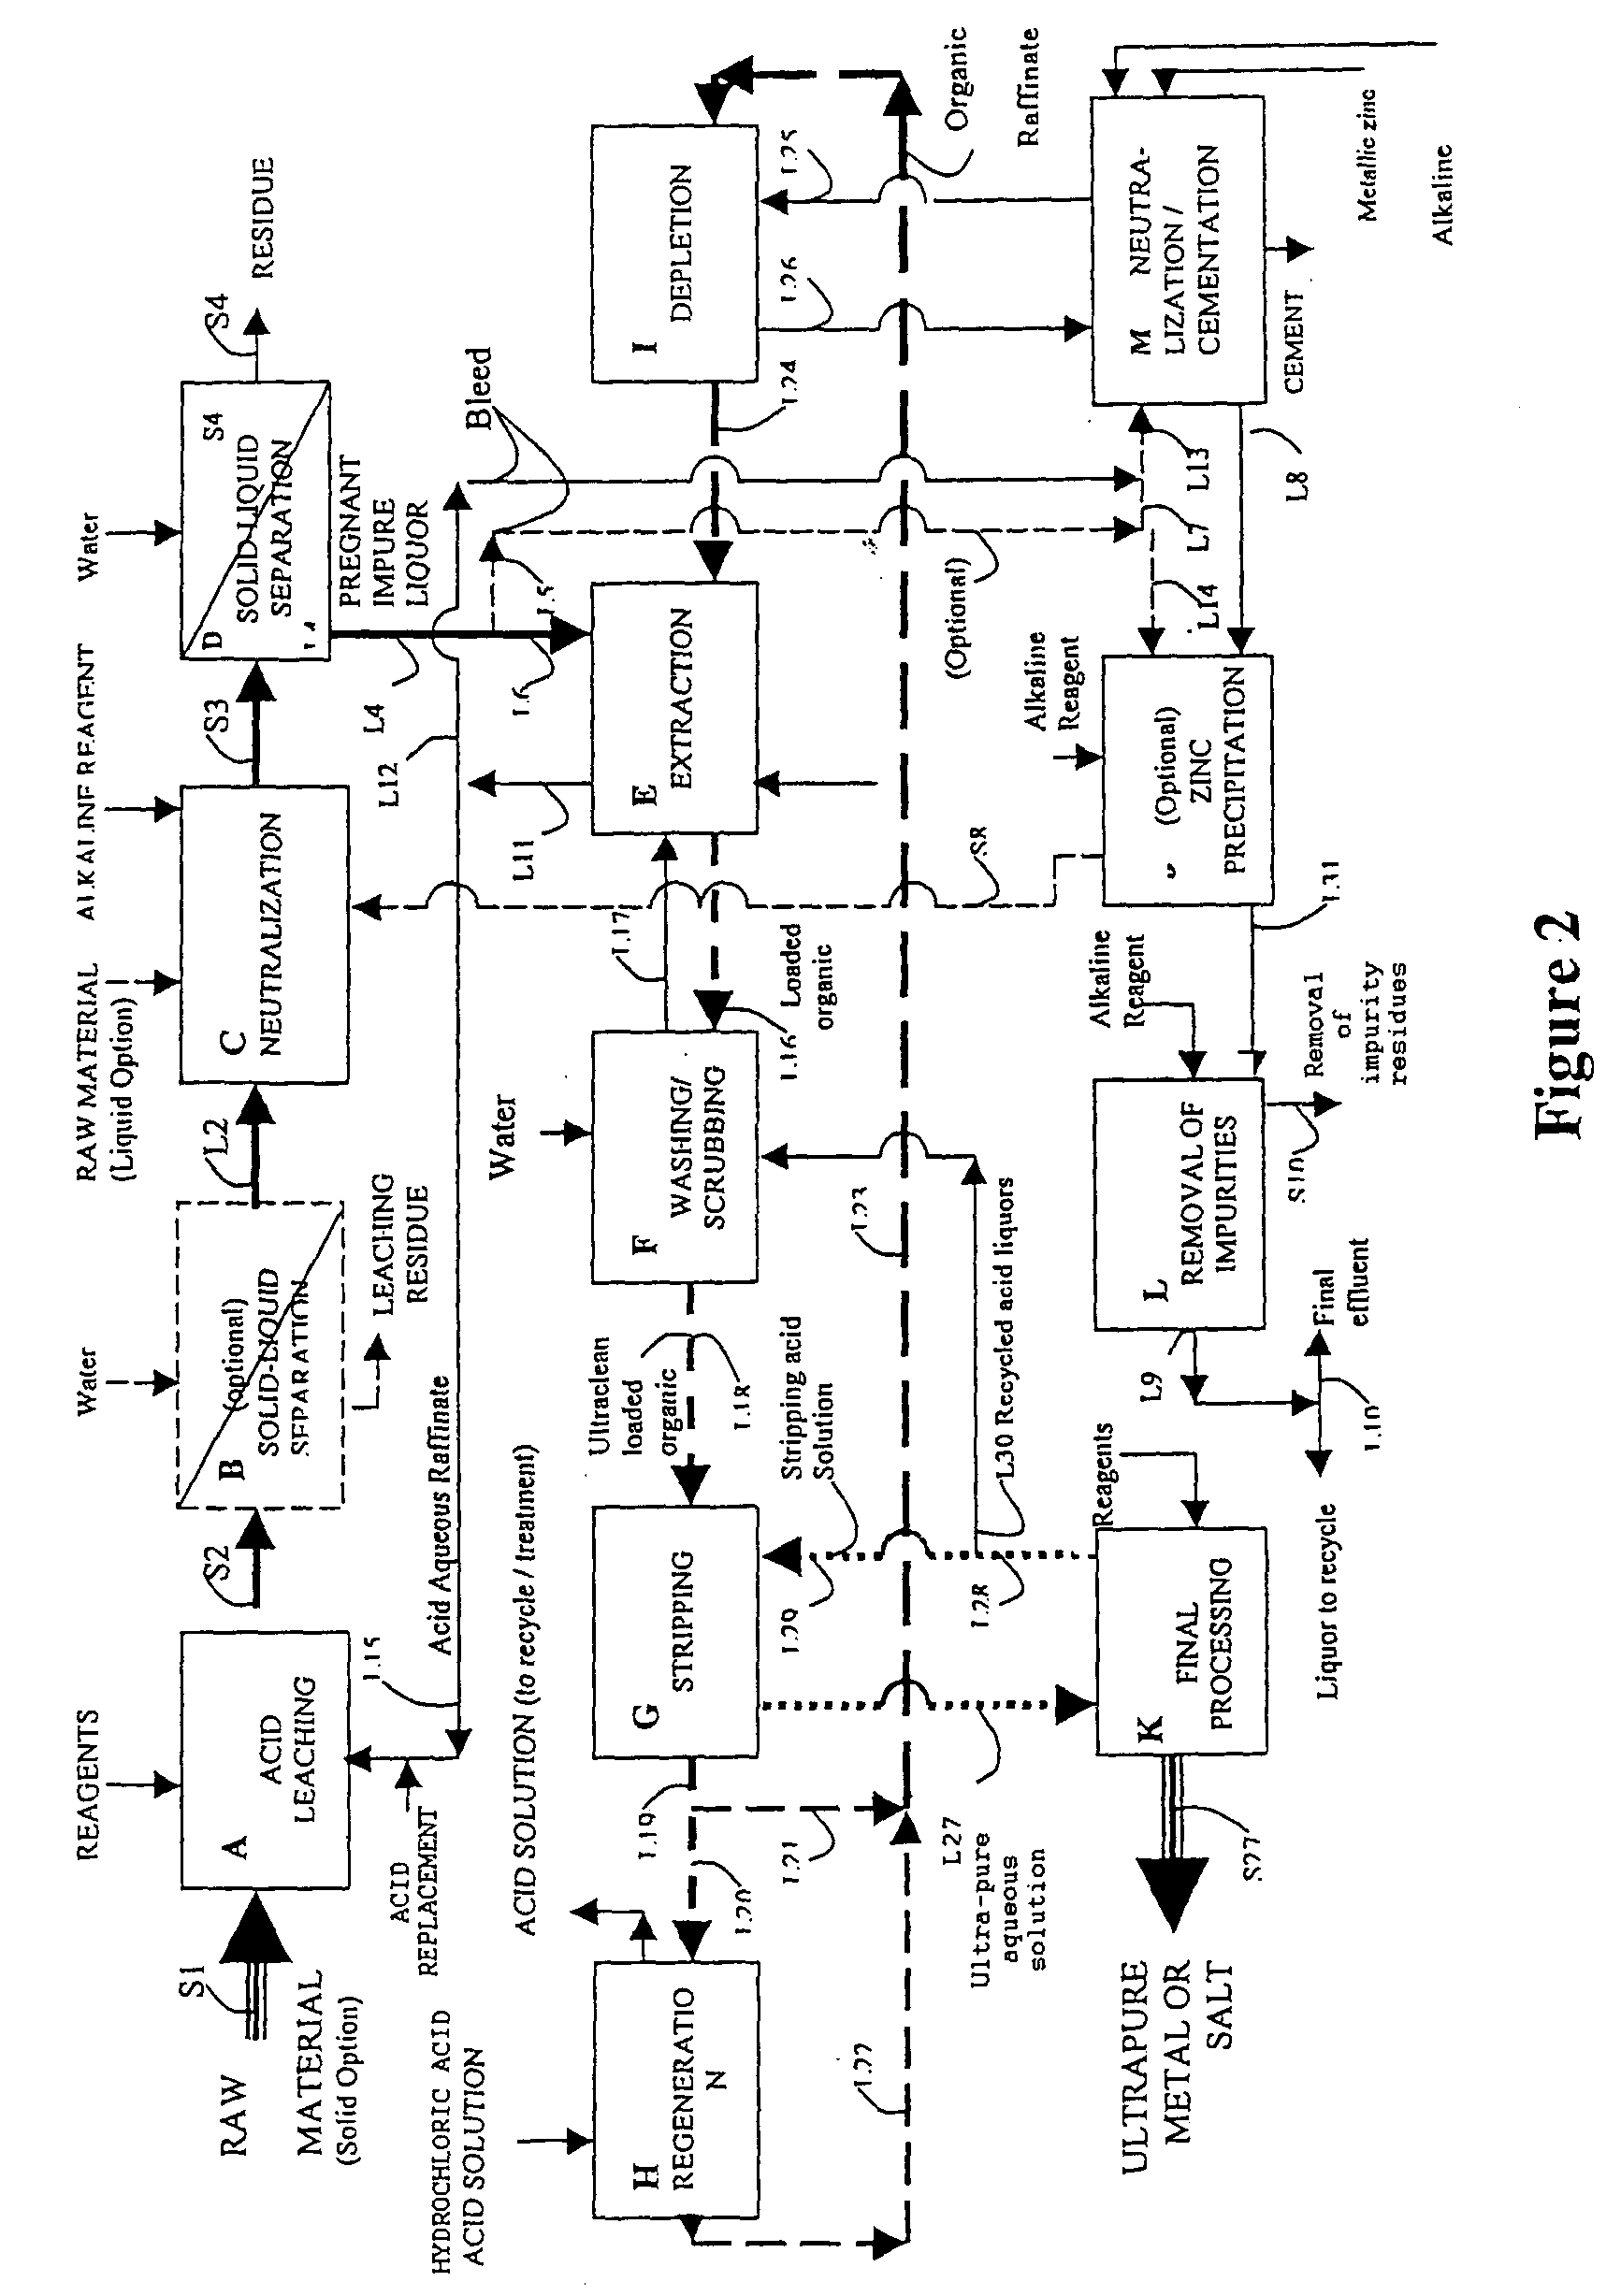 Process for electrolytic production of ultra-pure zinc or zinc compounds from zinc primary and secondary raw materials